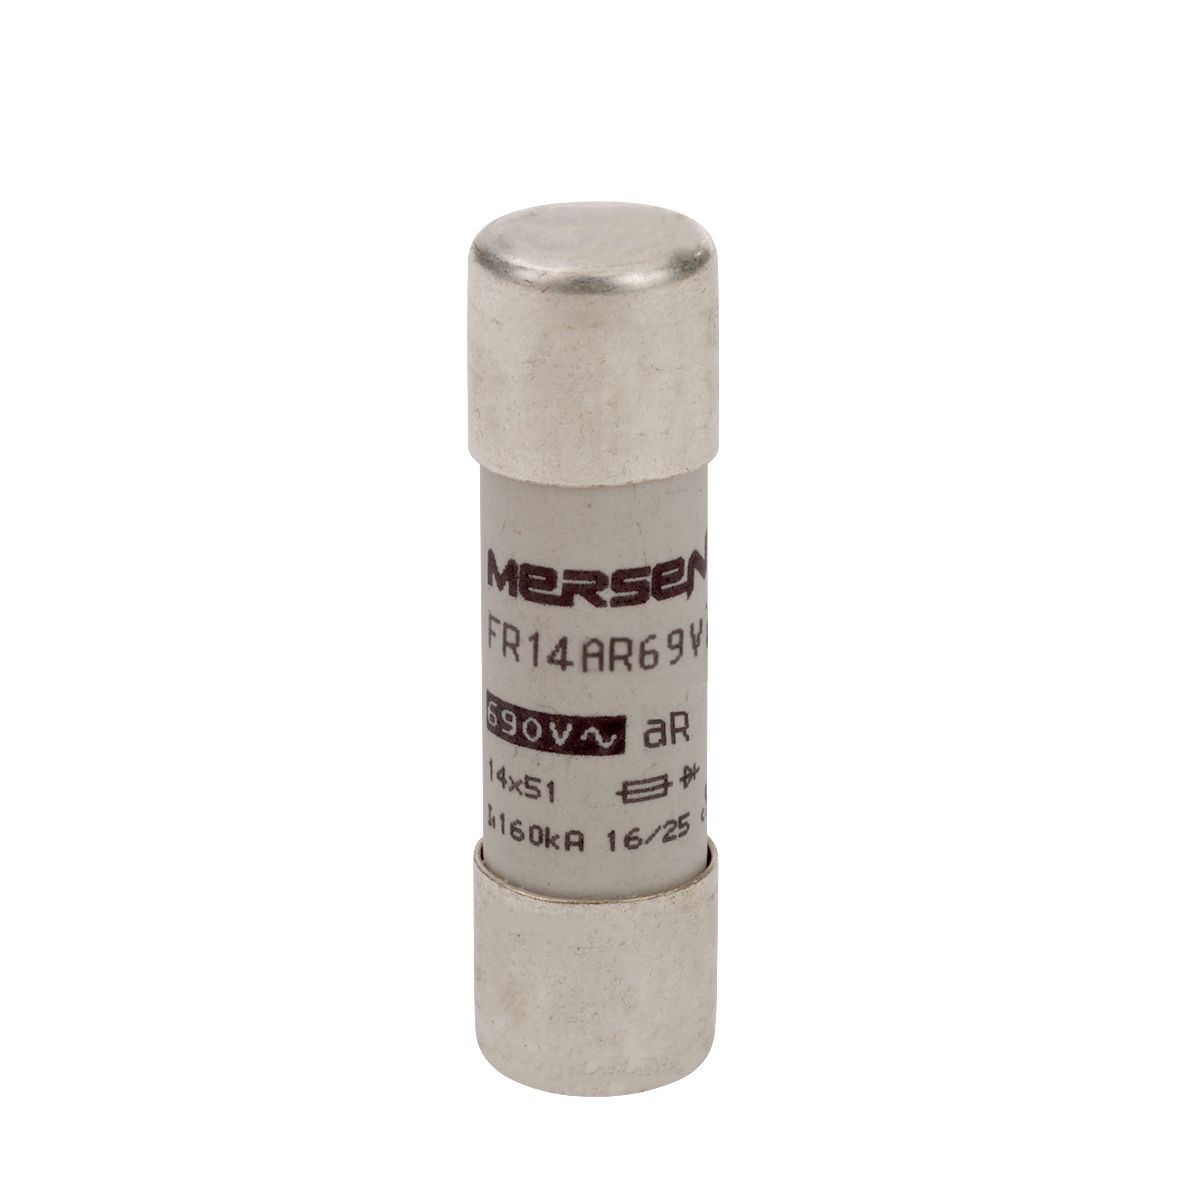 H1027325 - Cylindrical fuse-link aR 690VAC 14x51, 6A, without indicator